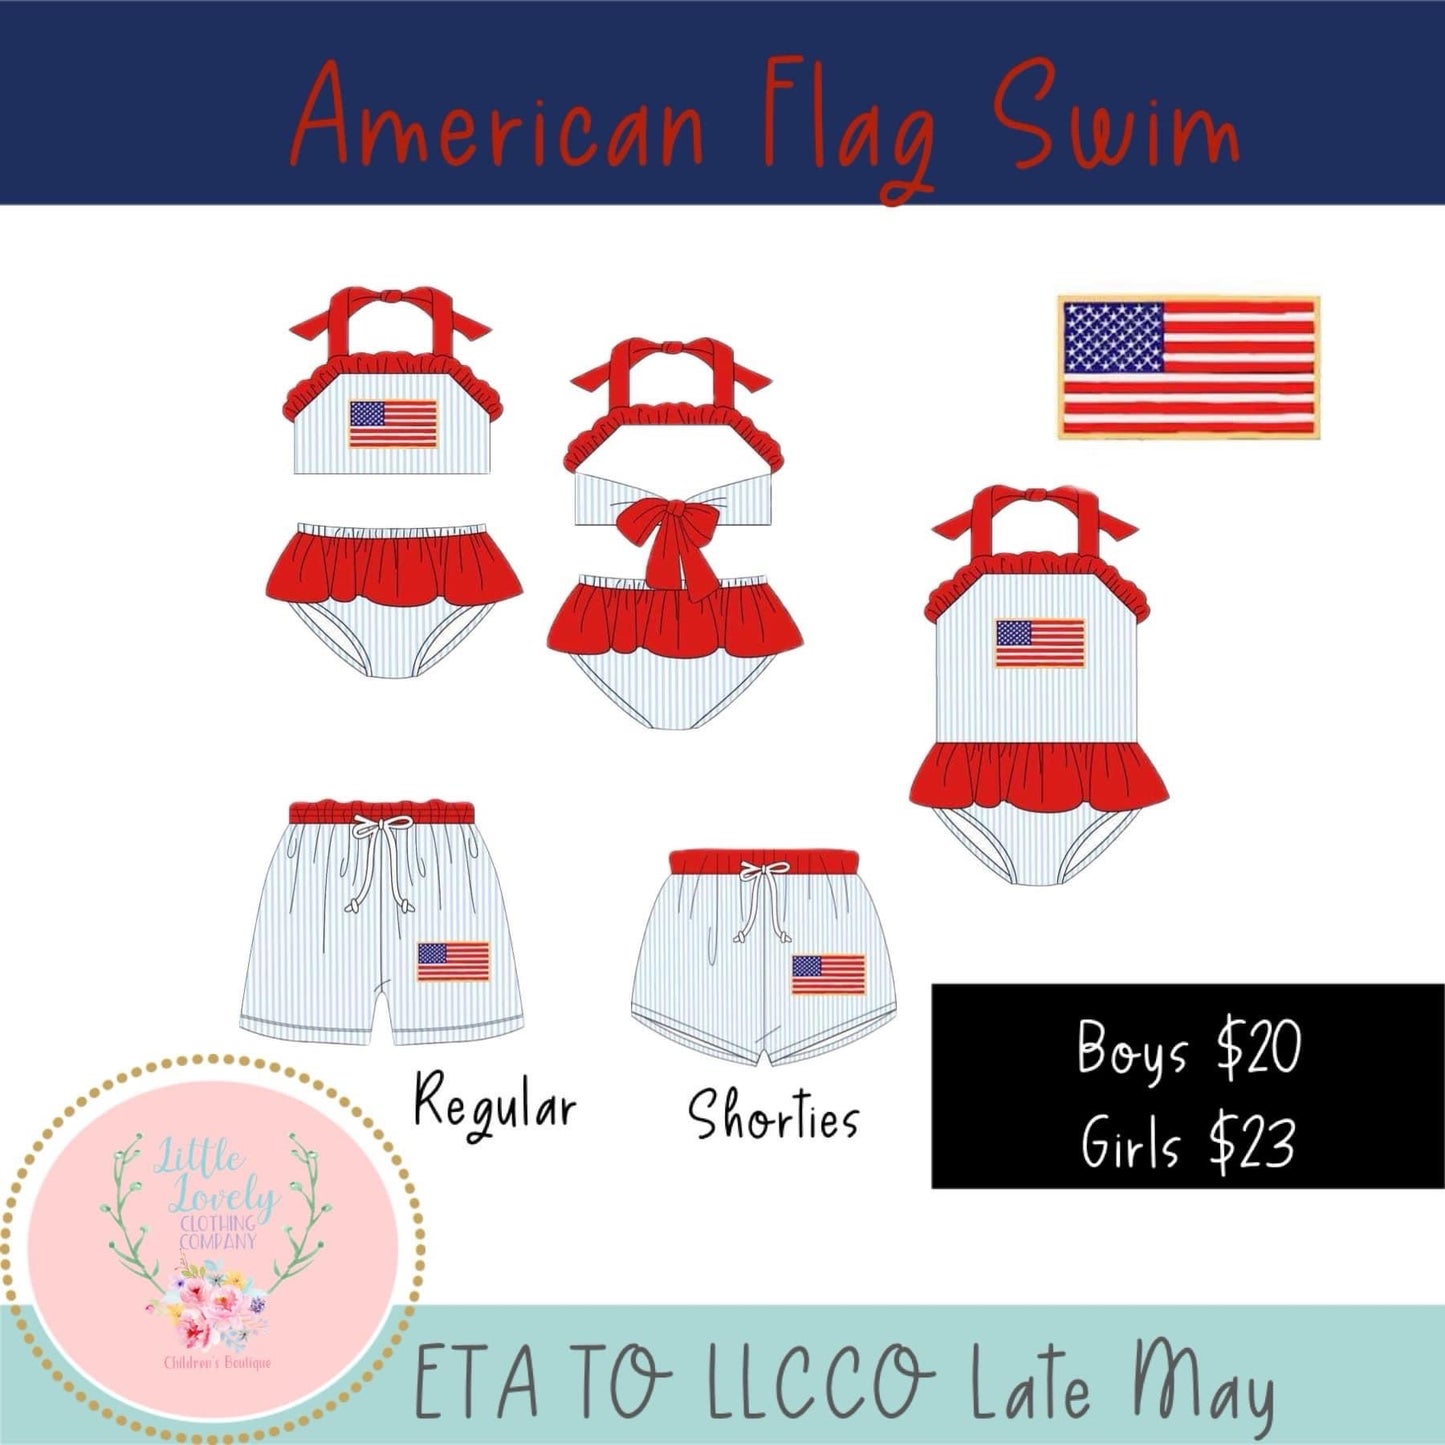 American Flag Swim Collection, Presale ETA: Late May to LLCCO, then to customers